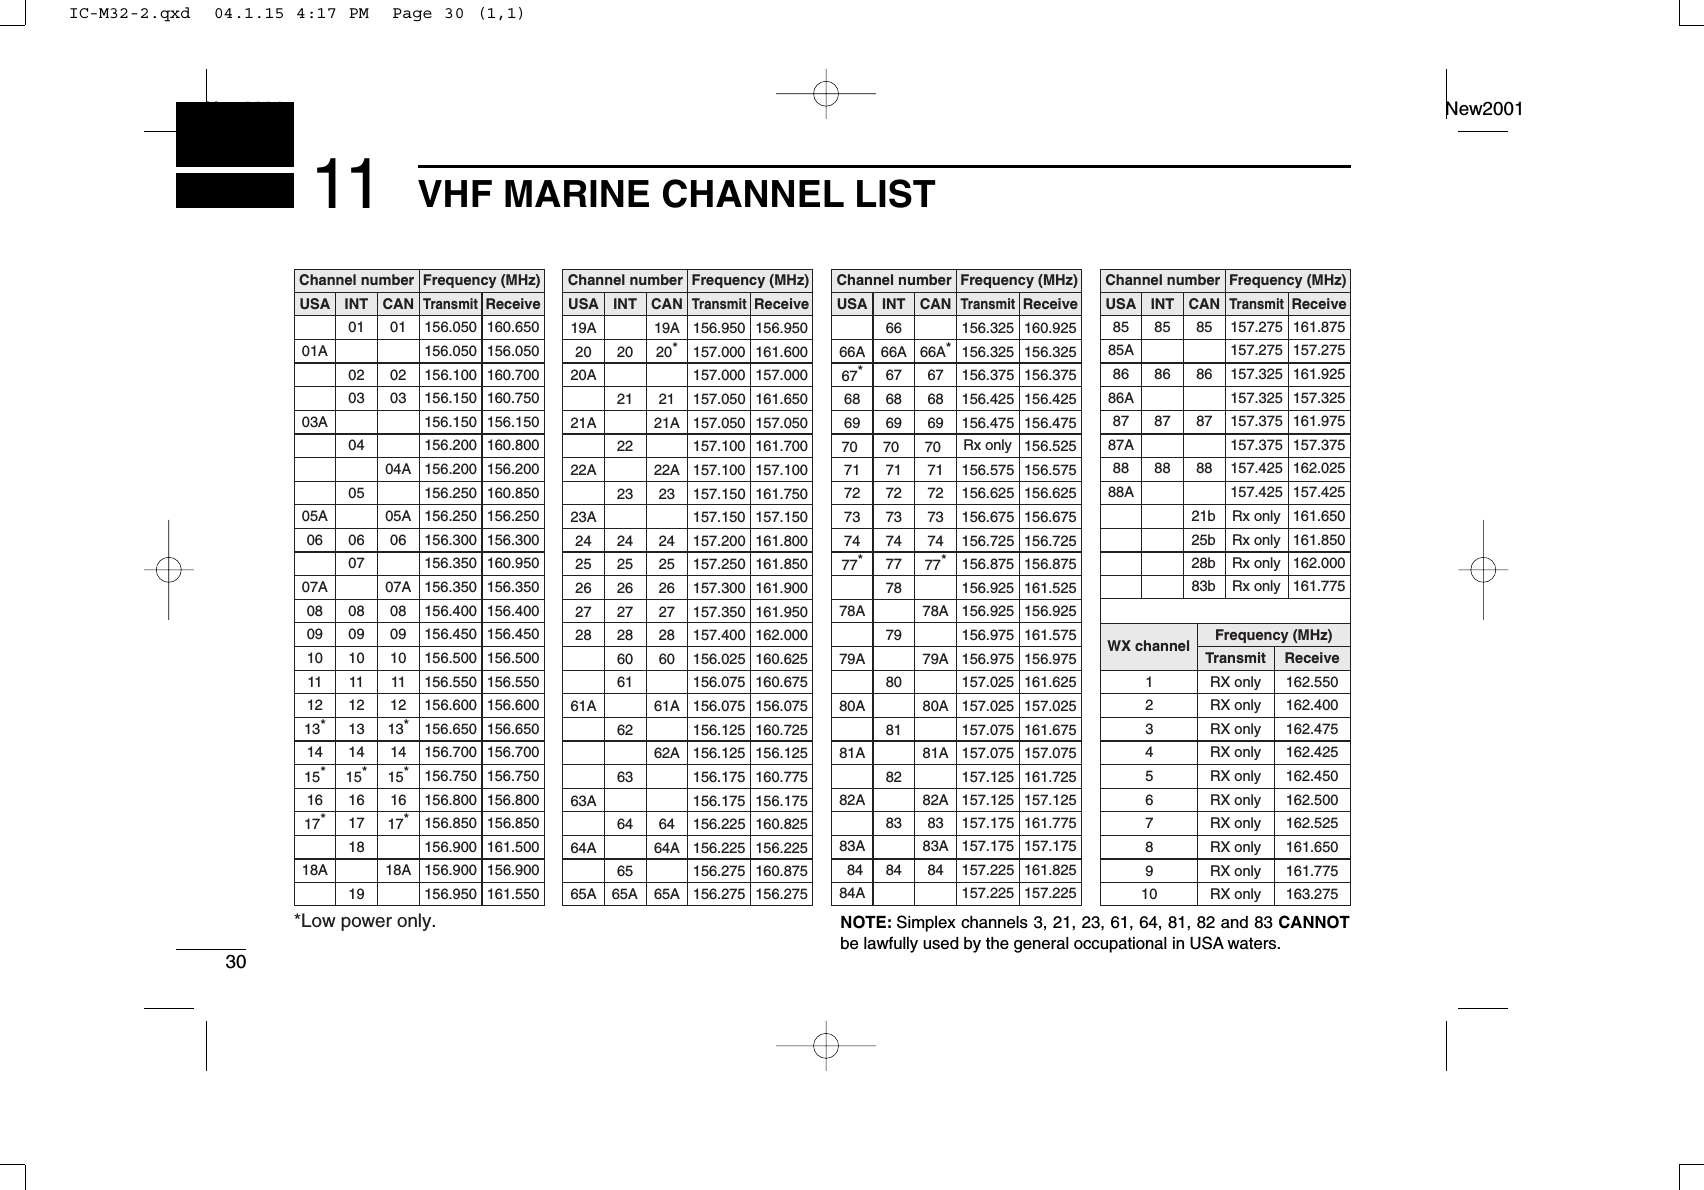 30VHF MARINE CHANNEL LISTNew2001New200111Channel numberUSA CANTransmitReceiveFrequency (MHz)INTChannel number Frequency (MHz)USA CANTransmitReceiveINTChannel number Frequency (MHz)USA CANTransmitReceiveINTChannel number Frequency (MHz)USA CANTransmitReceiveINTWX channel Frequency (MHz)Transmit Receive01 156.050 160.65001A 156.050 156.05002 156.100 160.70003 156.150 160.75003A 156.150 156.150156.200 160.80004A 156.200 156.200156.250 160.85005A 05A 156.250 156.25006 06 156.300 156.300156.350 160.95007A 07A 156.350 156.35008 08 156.400 156.40009 09 156.450 156.45010 10 156.500 156.50011 11 156.550 156.55012 12 156.600 156.60013*13*156.650 156.65014 14 156.700 156.70015*15*156.750 156.75016 16 156.800 156.80017*17*156.850 156.850156.900 161.50018A 18A 156.900 156.900010203040506070809101112131415*161718156.950 161.55019A 19A 156.950 156.95020 20*157.000 161.60021 157.050 161.65021A 21A 157.050 157.050157.100 161.70022A 22A 157.100 157.10023 157.150 161.75023A 157.150 157.15024 24 157.200 161.80025 25 157.250 161.85026 26 157.300 161.90027 27 157.350 161.95028 28 157.400 162.00060 156.025 160.625156.075 160.67561A 61A 156.075 156.075156.125 160.72562A 156.125 156.125156.175 160.77563A 156.175 156.17564 156.225 160.82564A 64A 156.225 156.22519202122232425262728606162636420A 157.000 157.00066A 66A*156.325 160.92567*67 156.375 156.37568 68 156.425 156.42569 69 156.475 156.47570 70 156.52571 71 156.575 156.57572 72 156.625 156.62573 73 156.675 156.67574 74 156.725 156.72577*77*156.875 156.875156.925 161.52578A 78A 156.925 156.925156.975 161.57579A 79A 156.975 156.975157.025 161.62580A 80A 157.025 157.025157.075 161.67581A 81A 157.075 157.075157.125 161.72582A 82A 157.125 157.125666768697071727374777879808182156.325 156.32566A85 85 157.275 161.87585A 157.275 157.27586 86 157.325 161.92586A 157.325 157.32587 87 157.375 161.97587A 157.375 157.37588 88 157.425 162.02588A 157.425 157.4258586878821b Rx onlyRx only161.65025b Rx only 161.85028b Rx only 162.00083b Rx only 161.77541 RX only 162.5502 RX only 162.4003 RX only 162.4755 RX only 162.4506 RX only 162.5007 RX only 162.5258 RX only 161.6509 RX only 161.77510 RX only 163.275RX only 162.425156.275 160.87565A 65A 156.275 156.2756565A 84A83 157.175 161.77583A 83A 157.175 157.17584 84 157.225 161.8258384157.225 157.225*Low power only.NOTE: Simplex channels 3, 21, 23, 61, 64, 81, 82 and 83 CANNOTbe lawfully used by the general occupational in USA waters.IC-M32-2.qxd  04.1.15 4:17 PM  Page 30 (1,1)